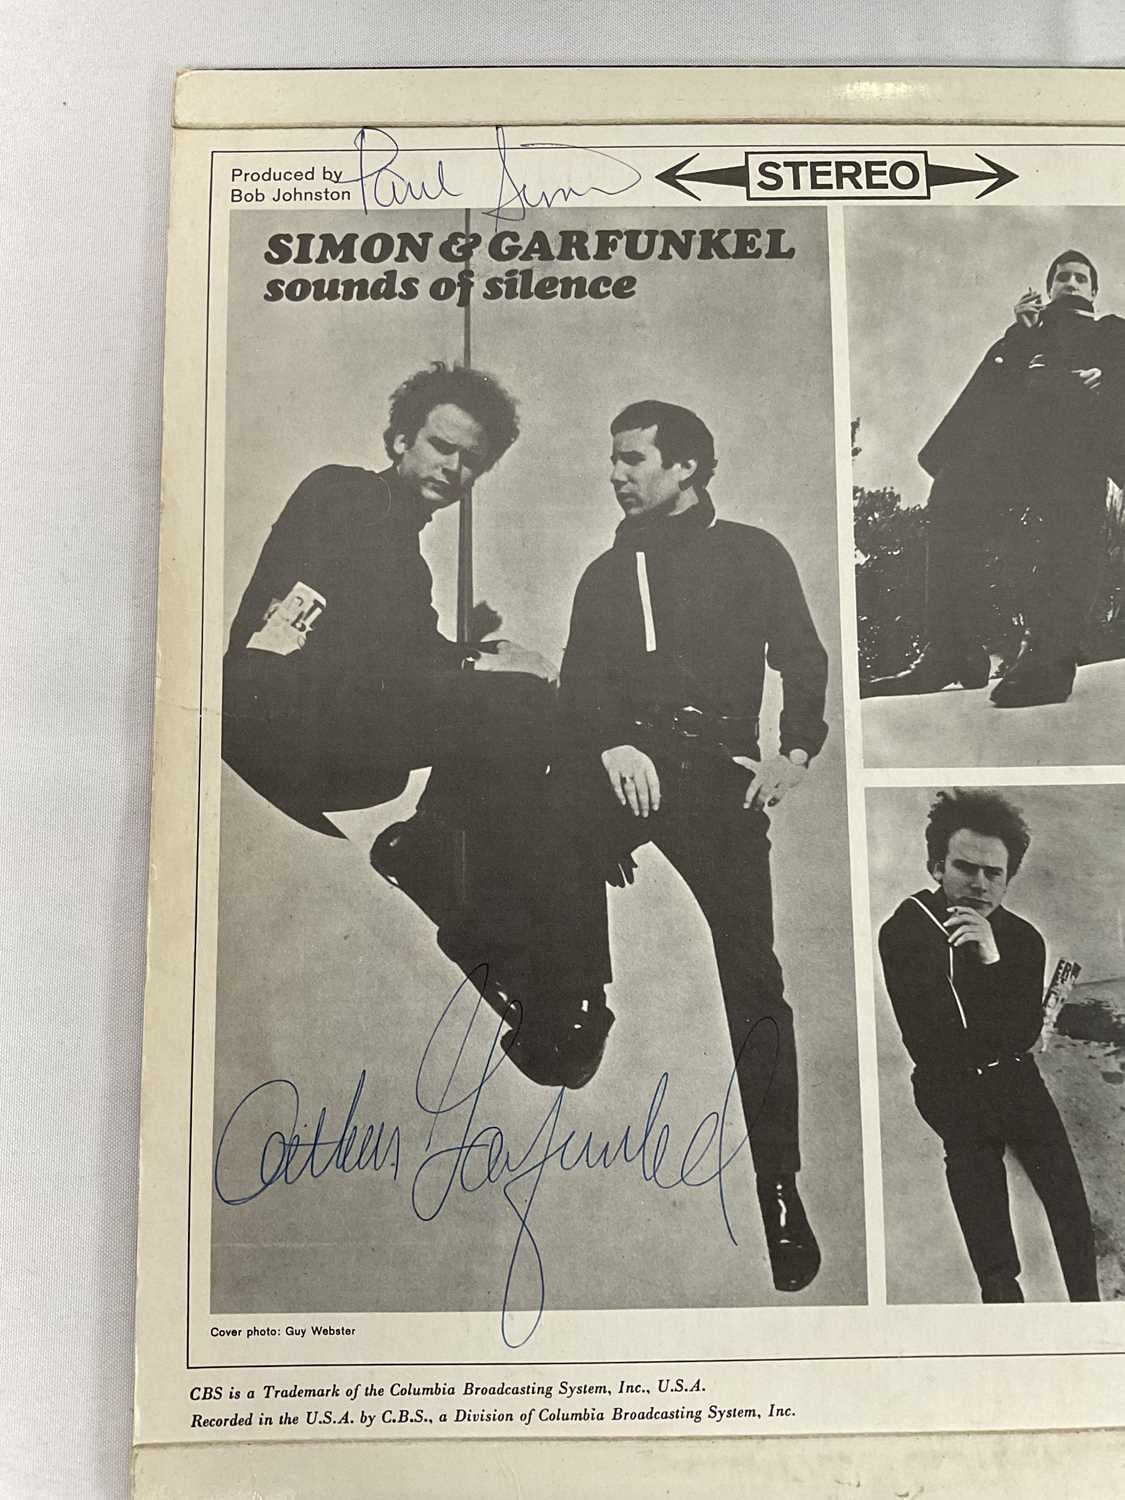 SIMON AND GARFUNKEL - SOUNDS OF SILENCE (1966) Vinyl LP signed in blue pen by Paul Simon and Art - Image 3 of 3